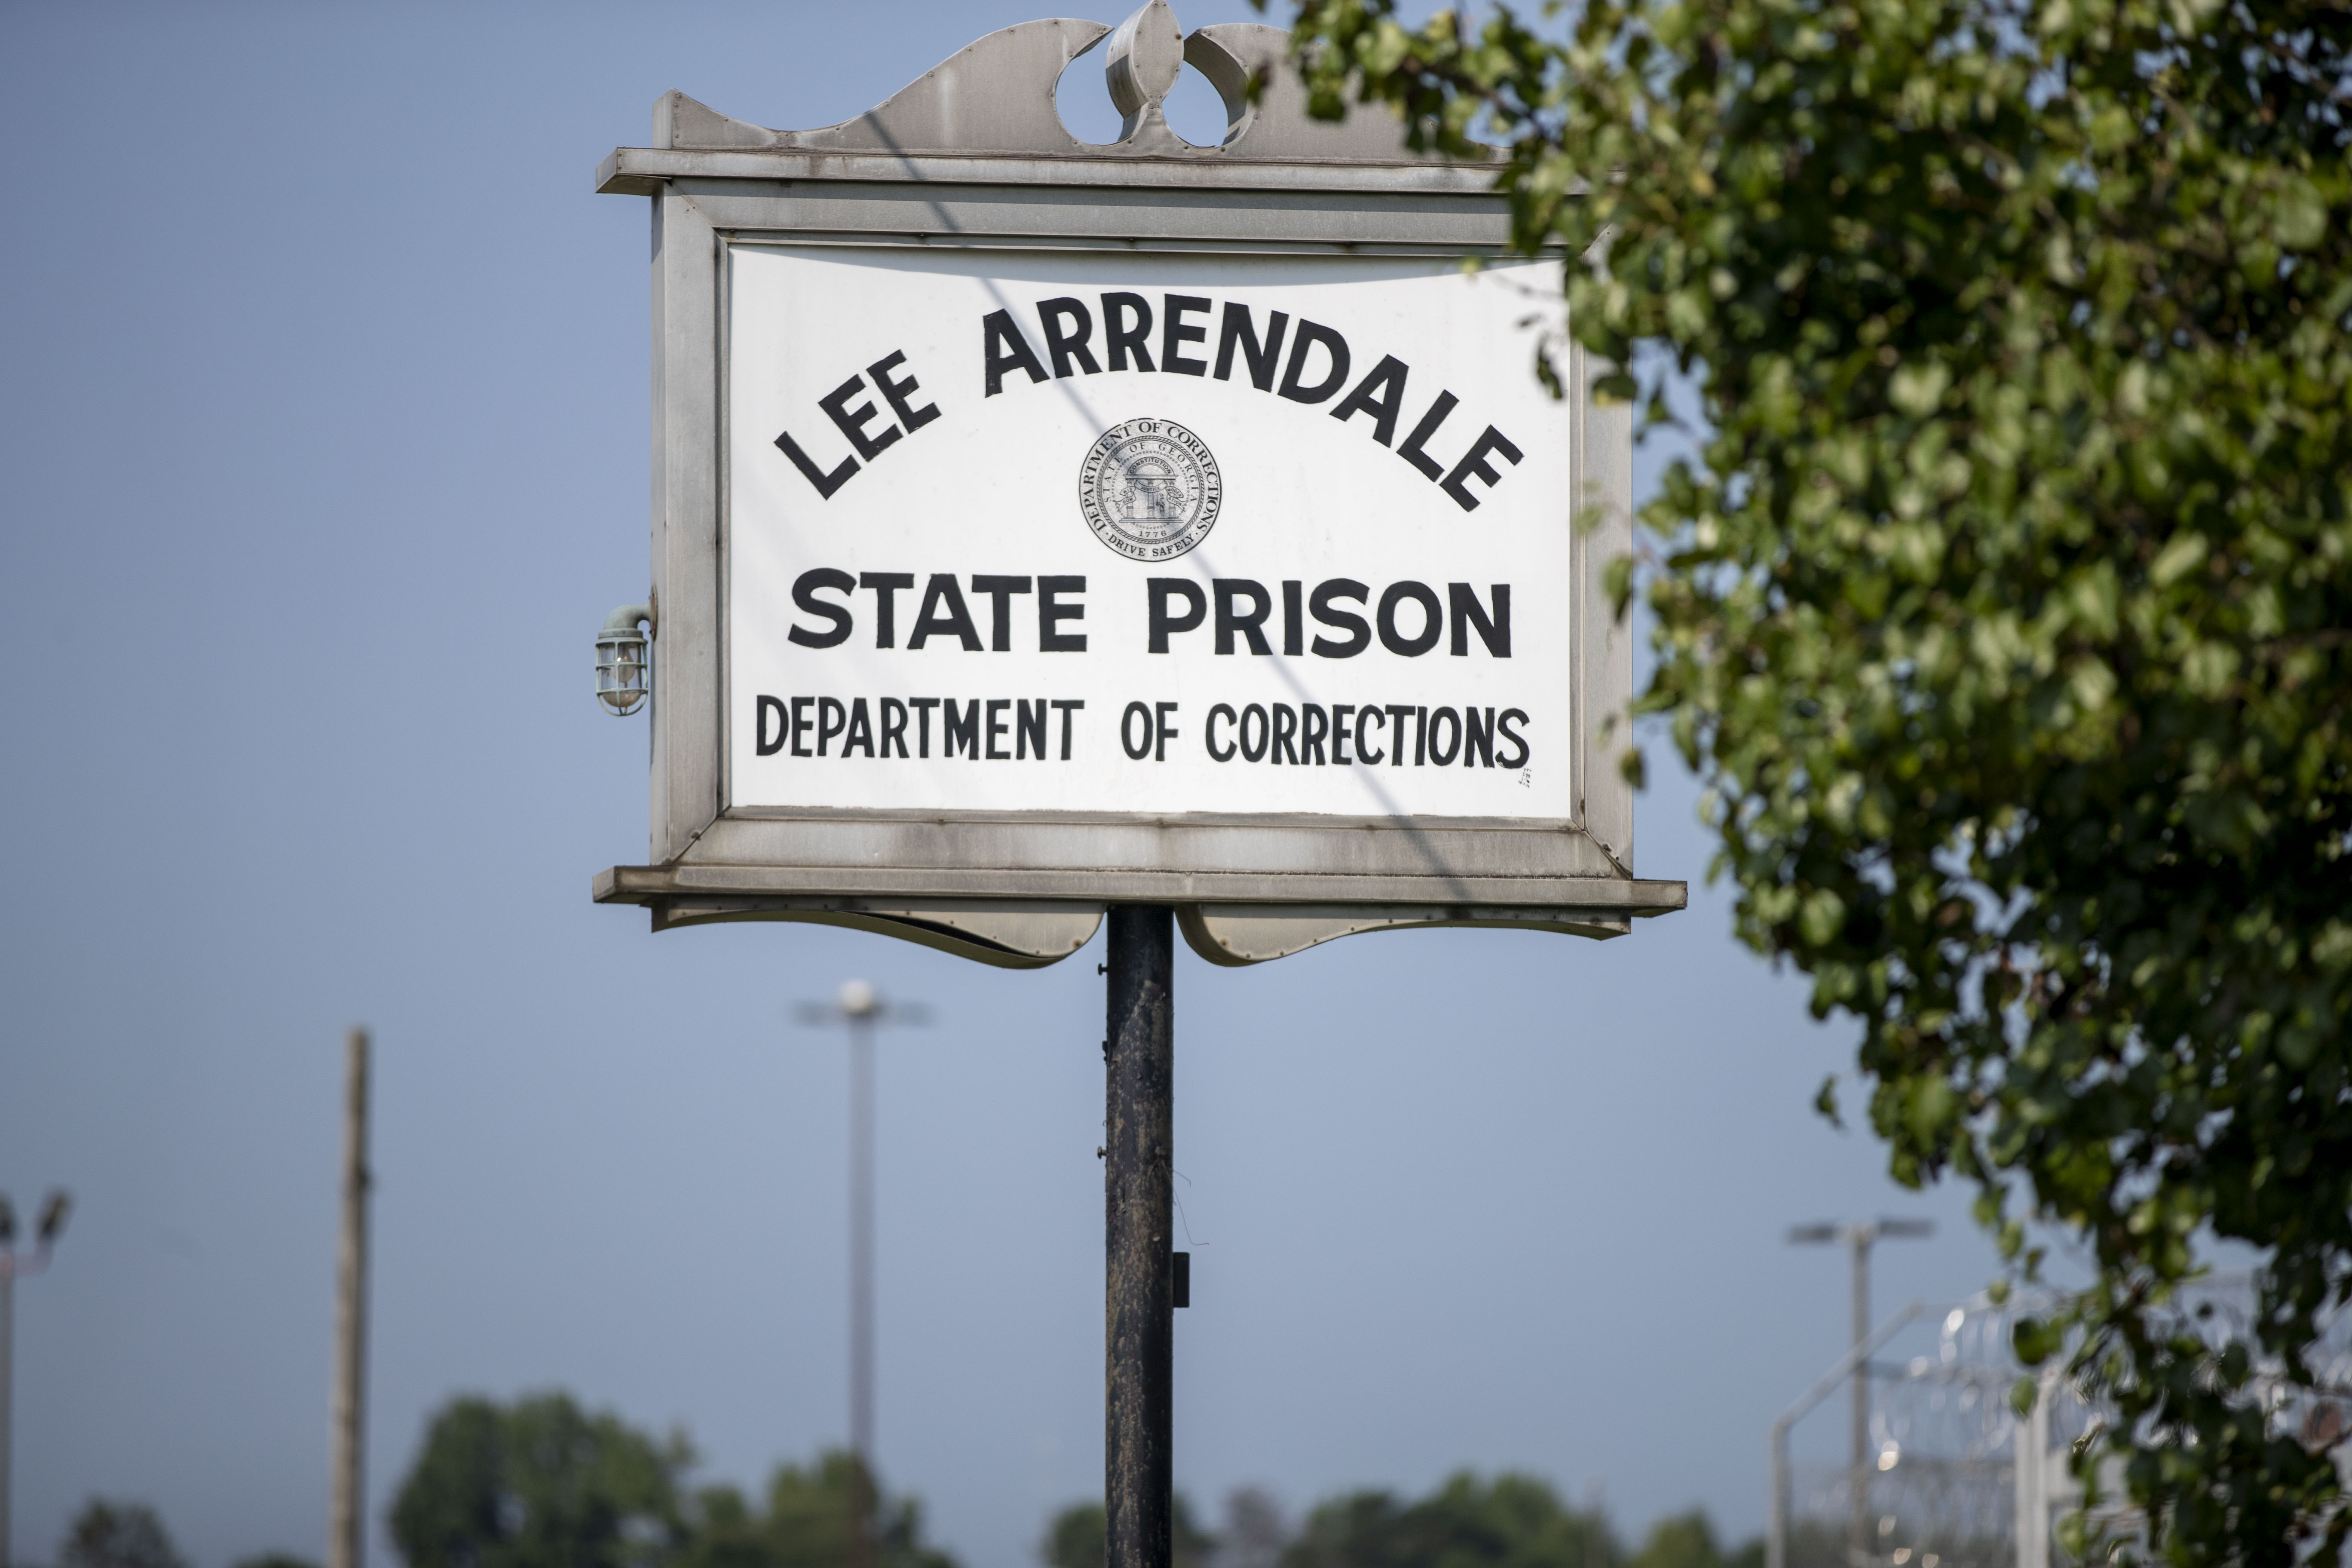 Georgia lawmakers barred from touring Lee Arrendale State Prison